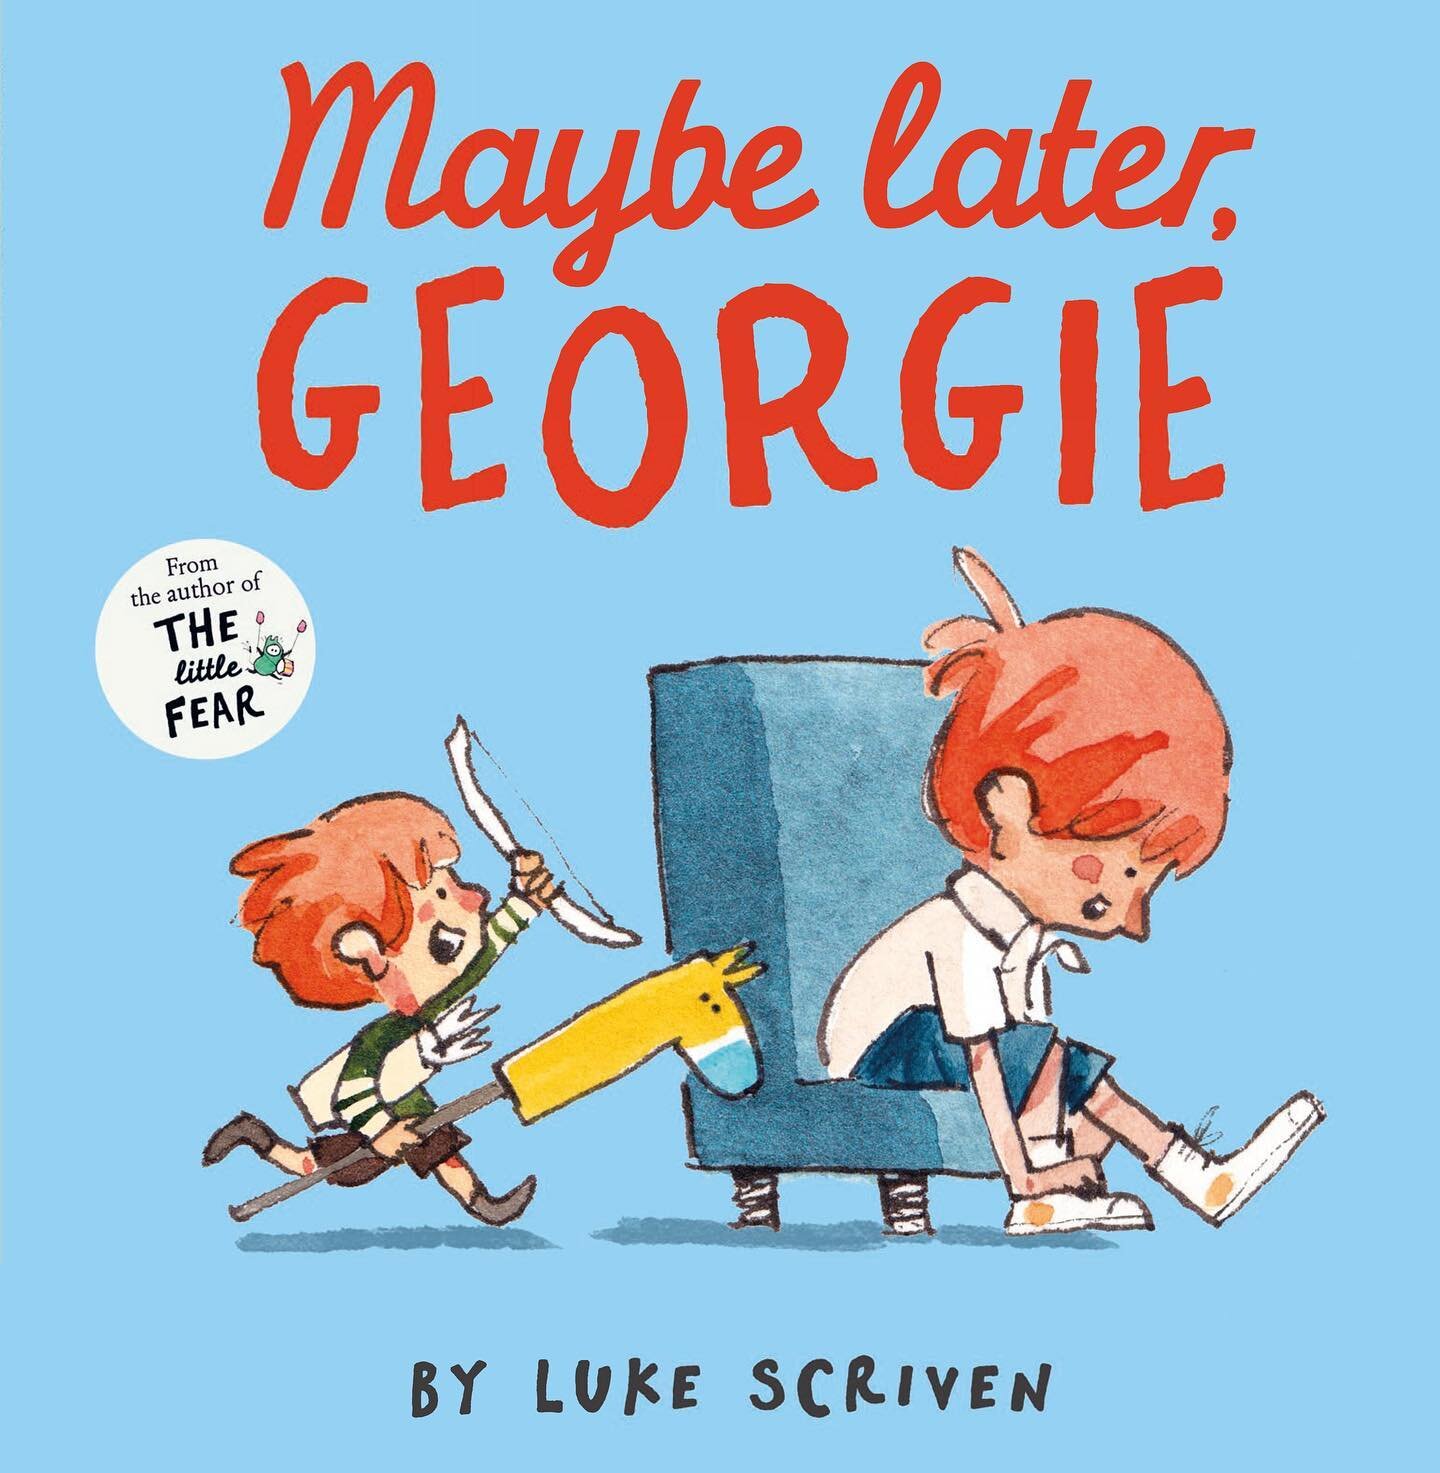 &lsquo;Maybe Later, Georgie&rsquo; is OUT TODAY!

Just some thank yous, hope this isn&rsquo;t too clunky - 

This is a story that I am really proud of and I owe thanks to my Editor Alice and Art Director Candice, for nudging me in the direction to ex